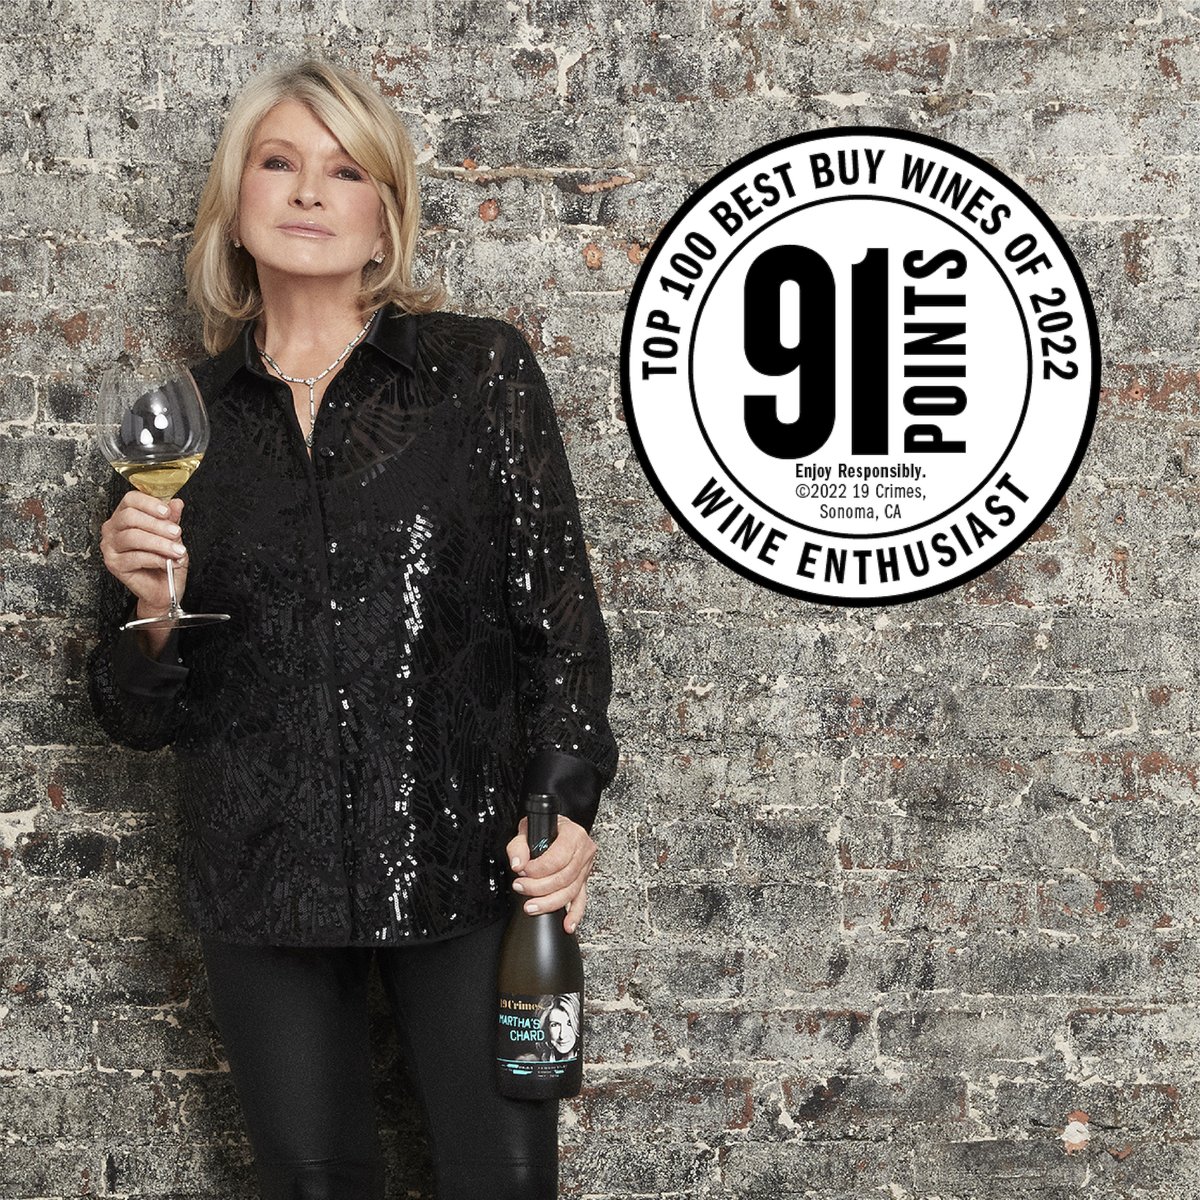 I am beyond excited to announce my @19Crimes Martha’s Chard received 91 points and ranked #12 in @WineEnthusiast Top 100 Best Buys. Cheers to Martha’s Chard!